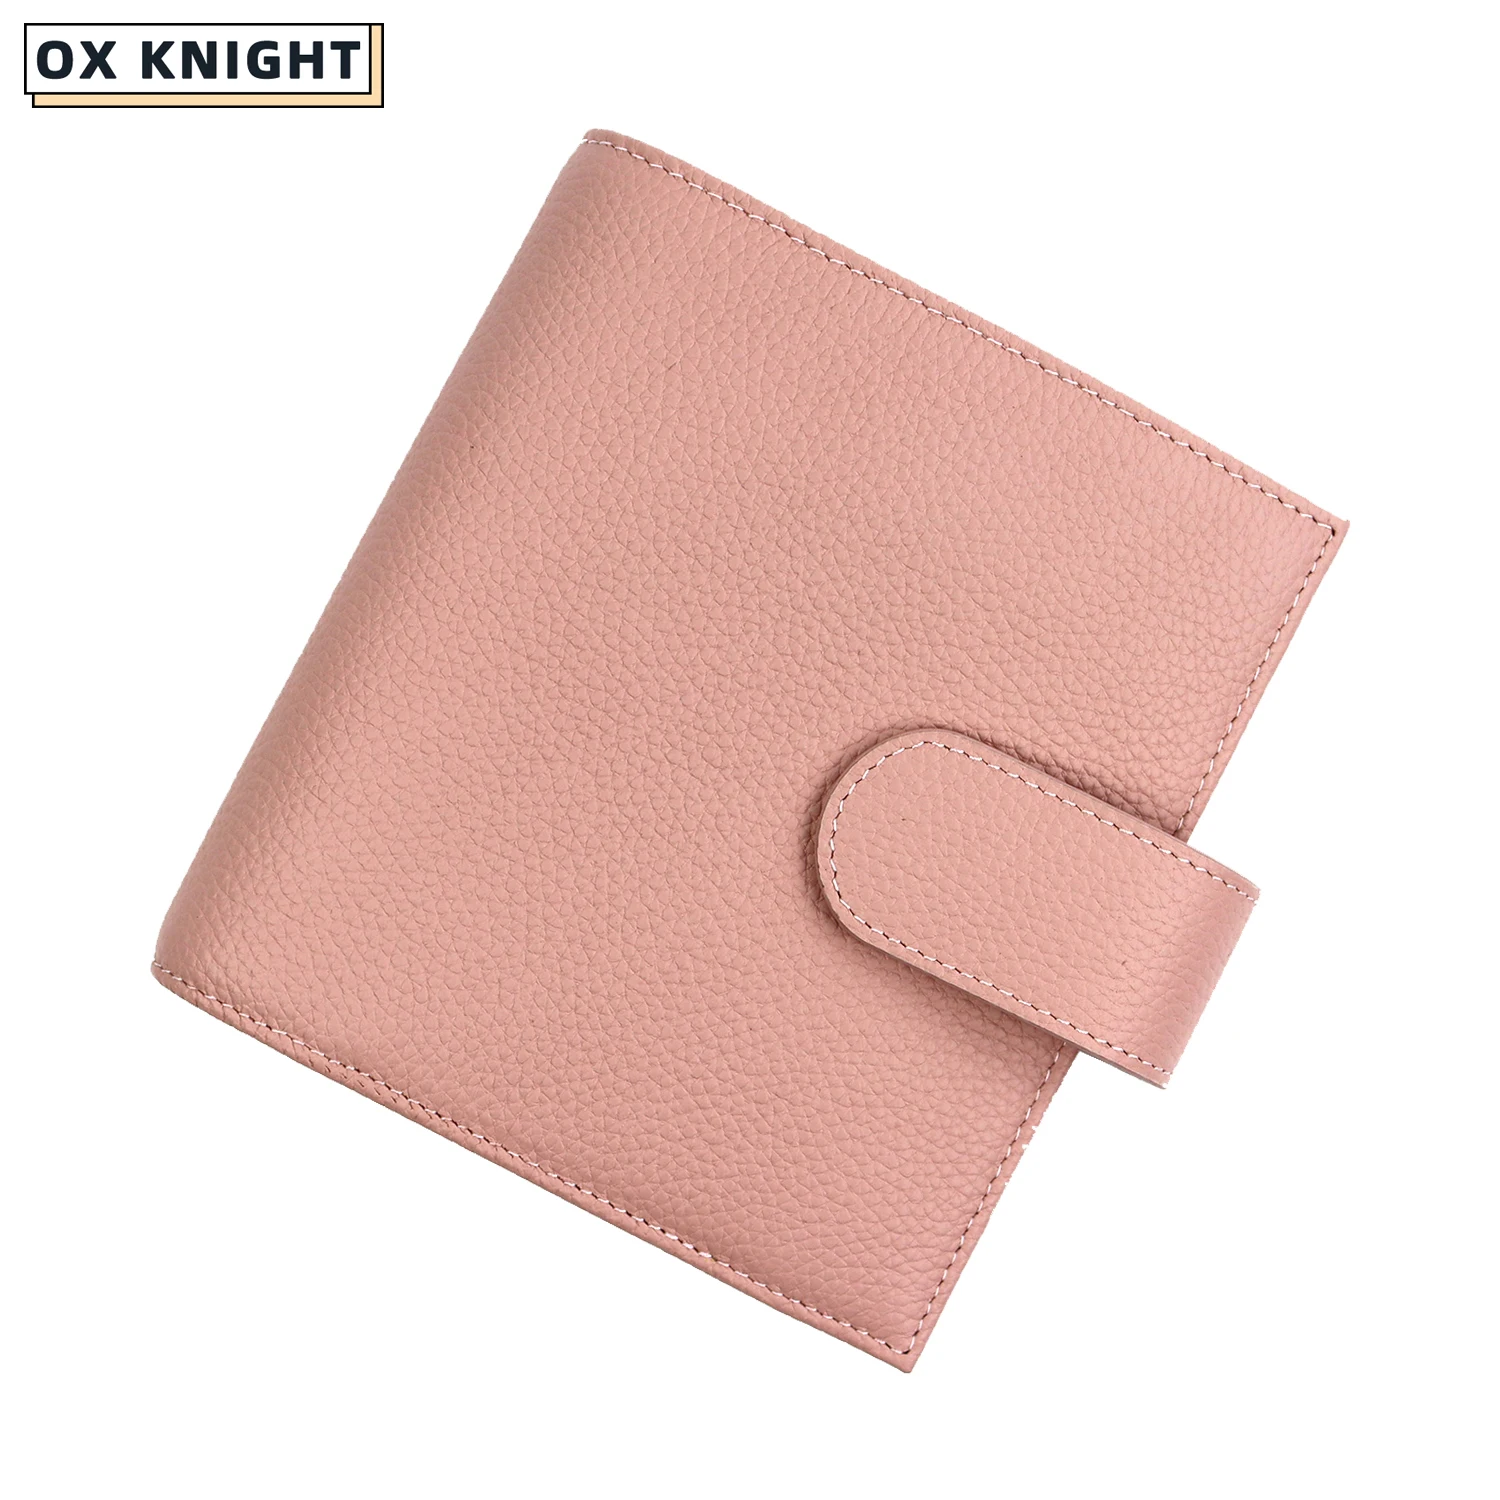 OX KNIGHT Original Genuine Pebbled Grain Leather Notebook With 19 MM Ring Agenda Organizer Notepad Journal Sketchbook